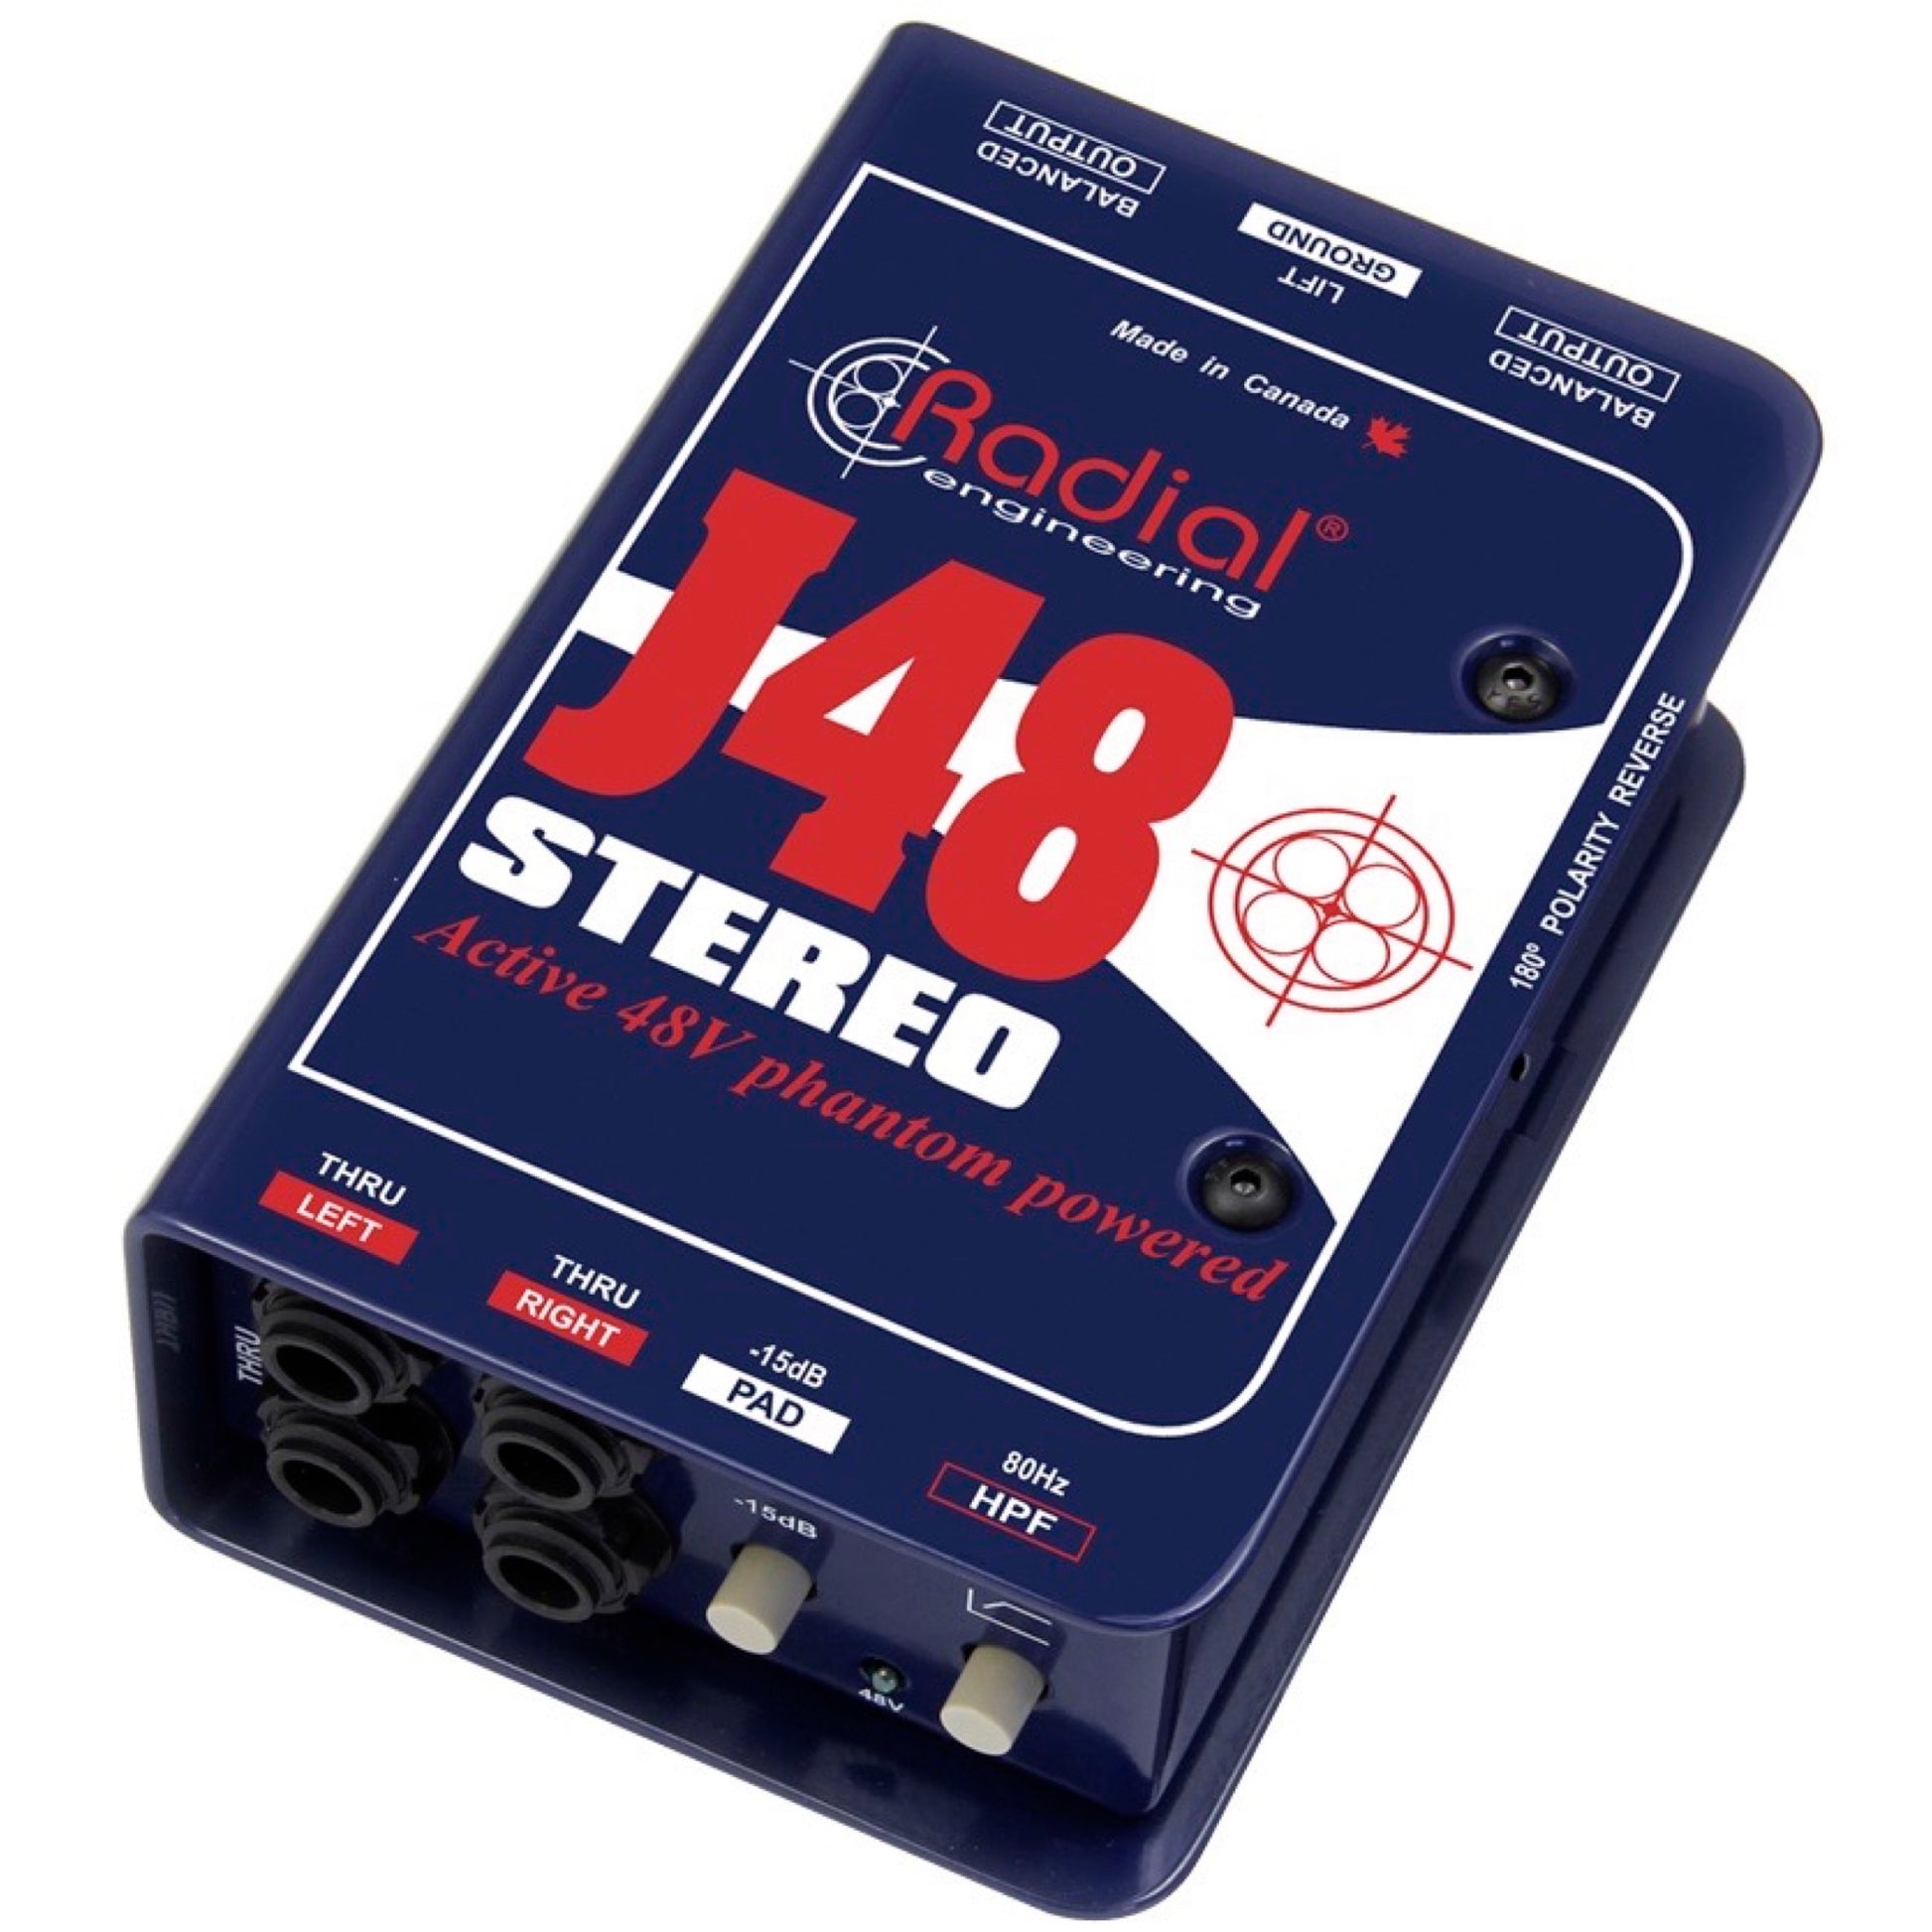 Radial J48 Stereo Active Direct Box